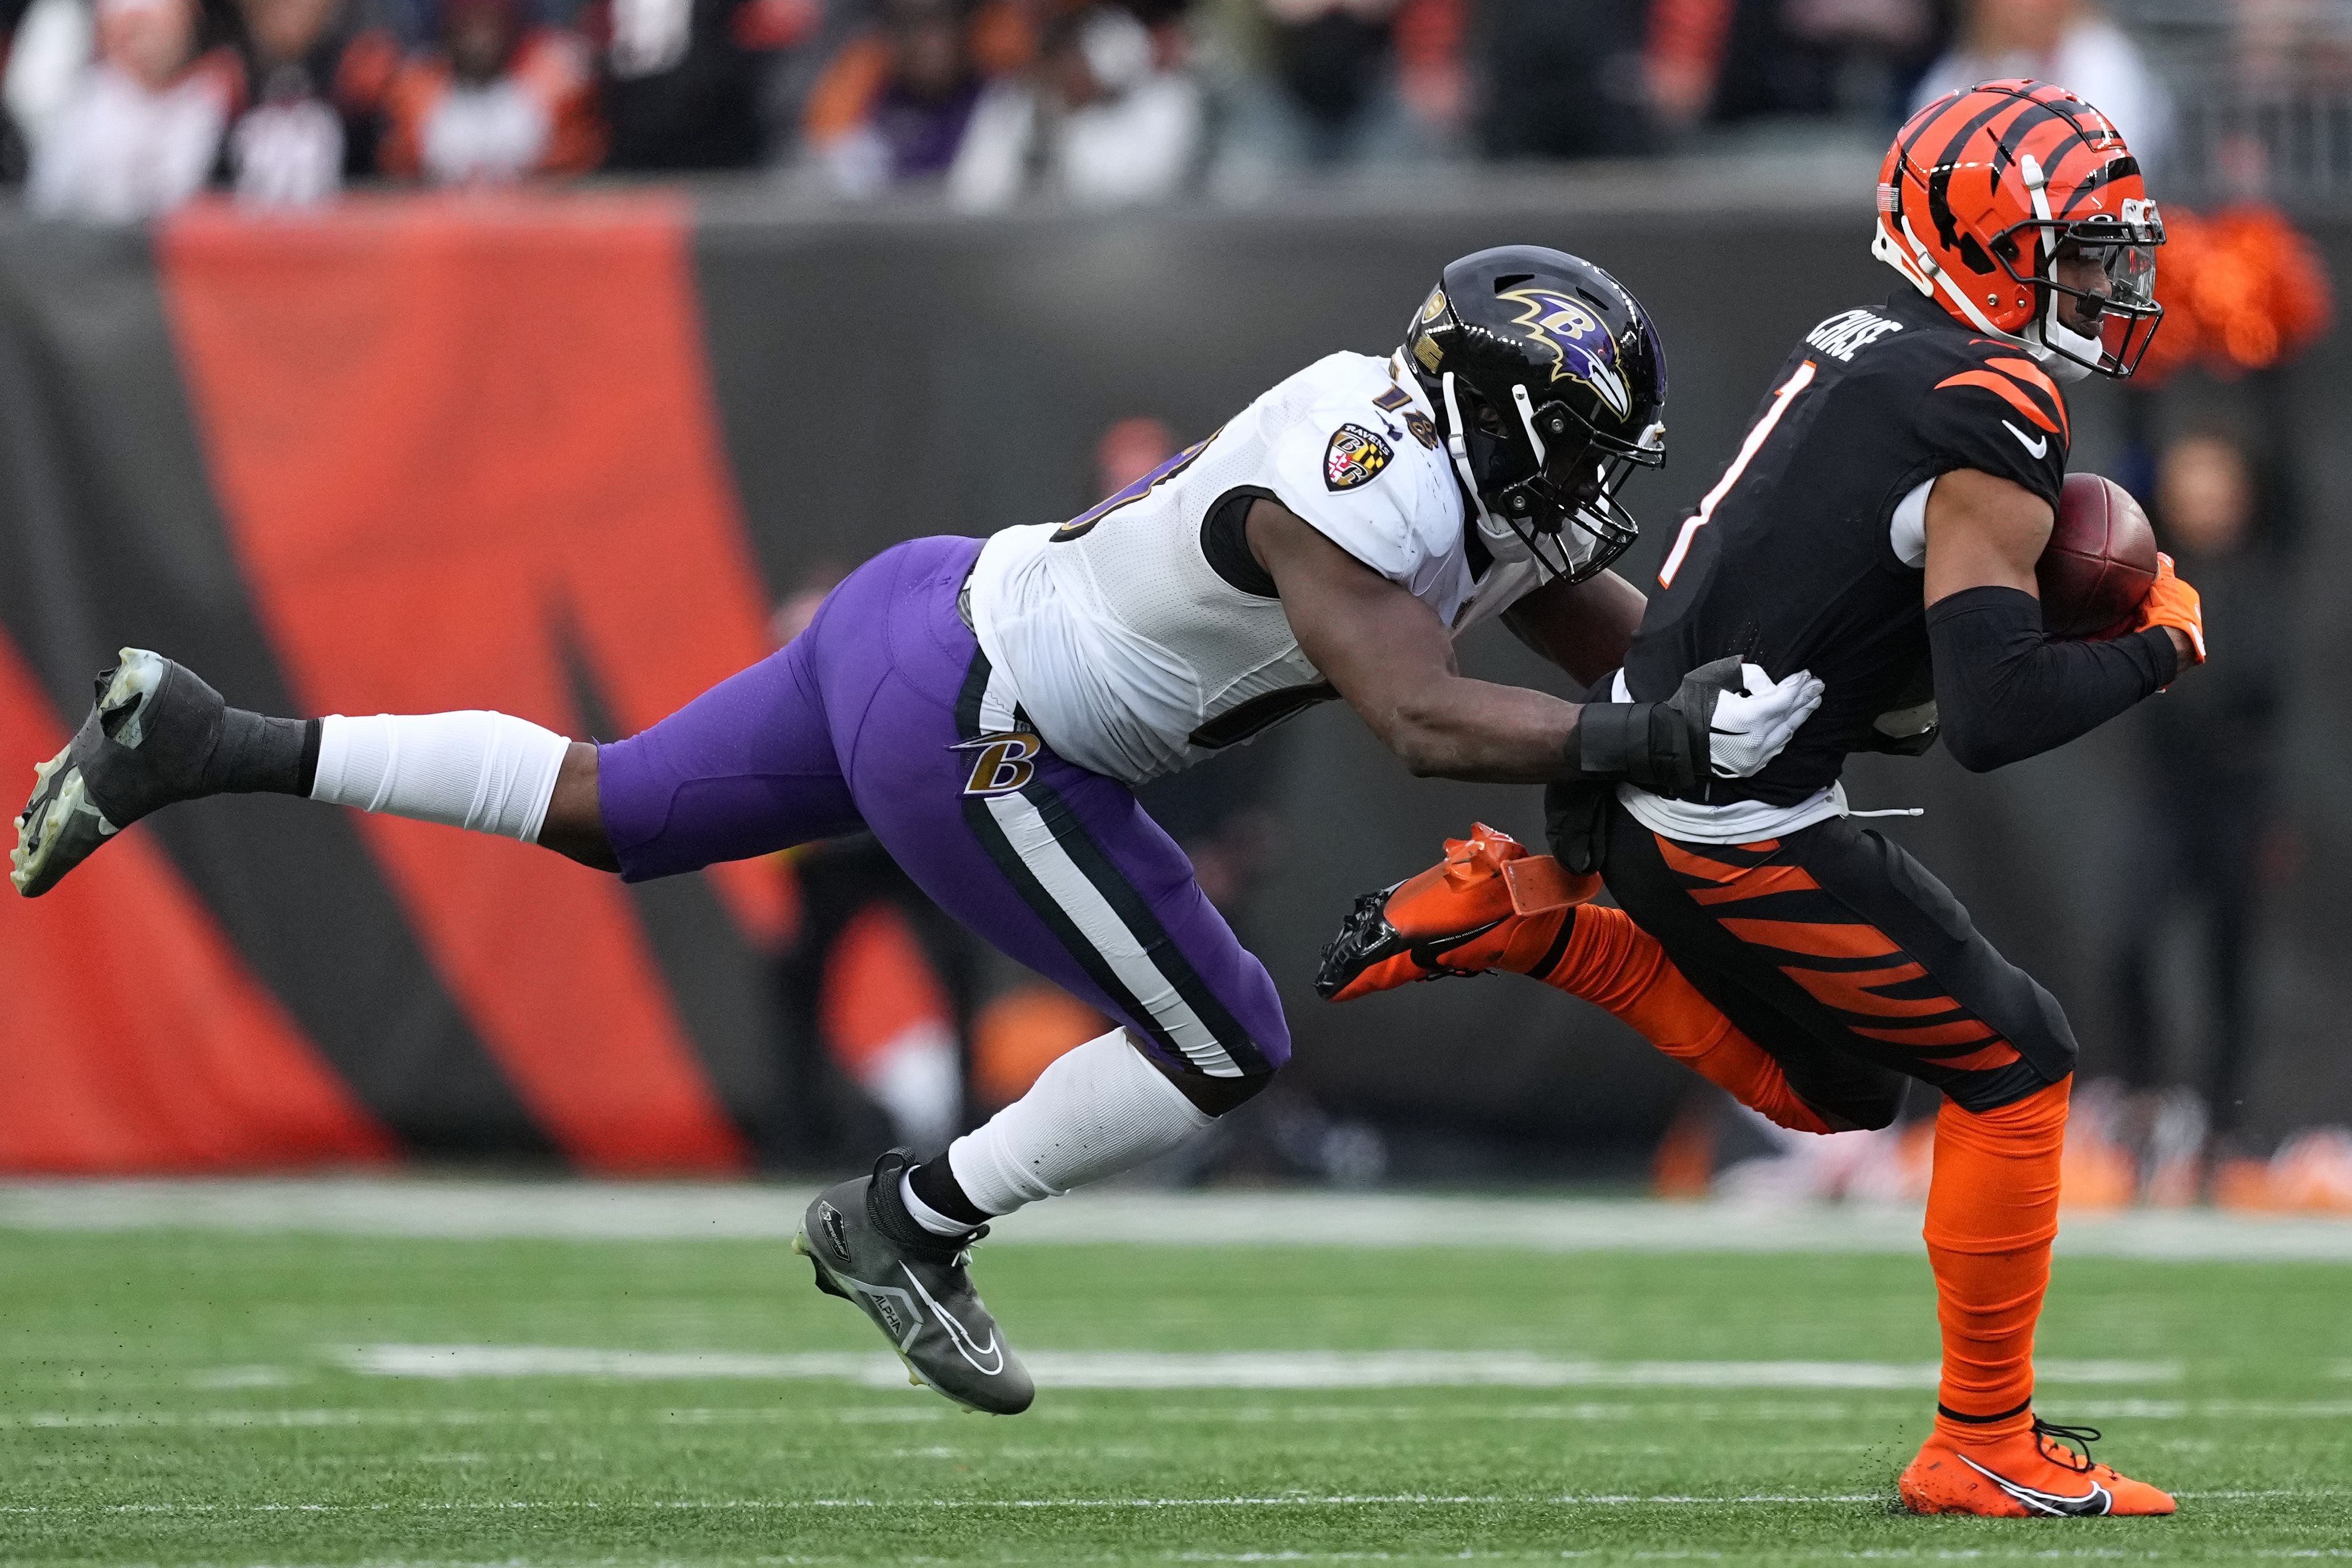 Inside linebacker Roquan Smith (L) of the Baltimore Ravens tackles wide Receiver Ja'Marr Chase of the Cincinnati Bengals in the game at Paycor Stadium in Cincinnati, Ohio, U.S., January 8, 2023. /CFP 